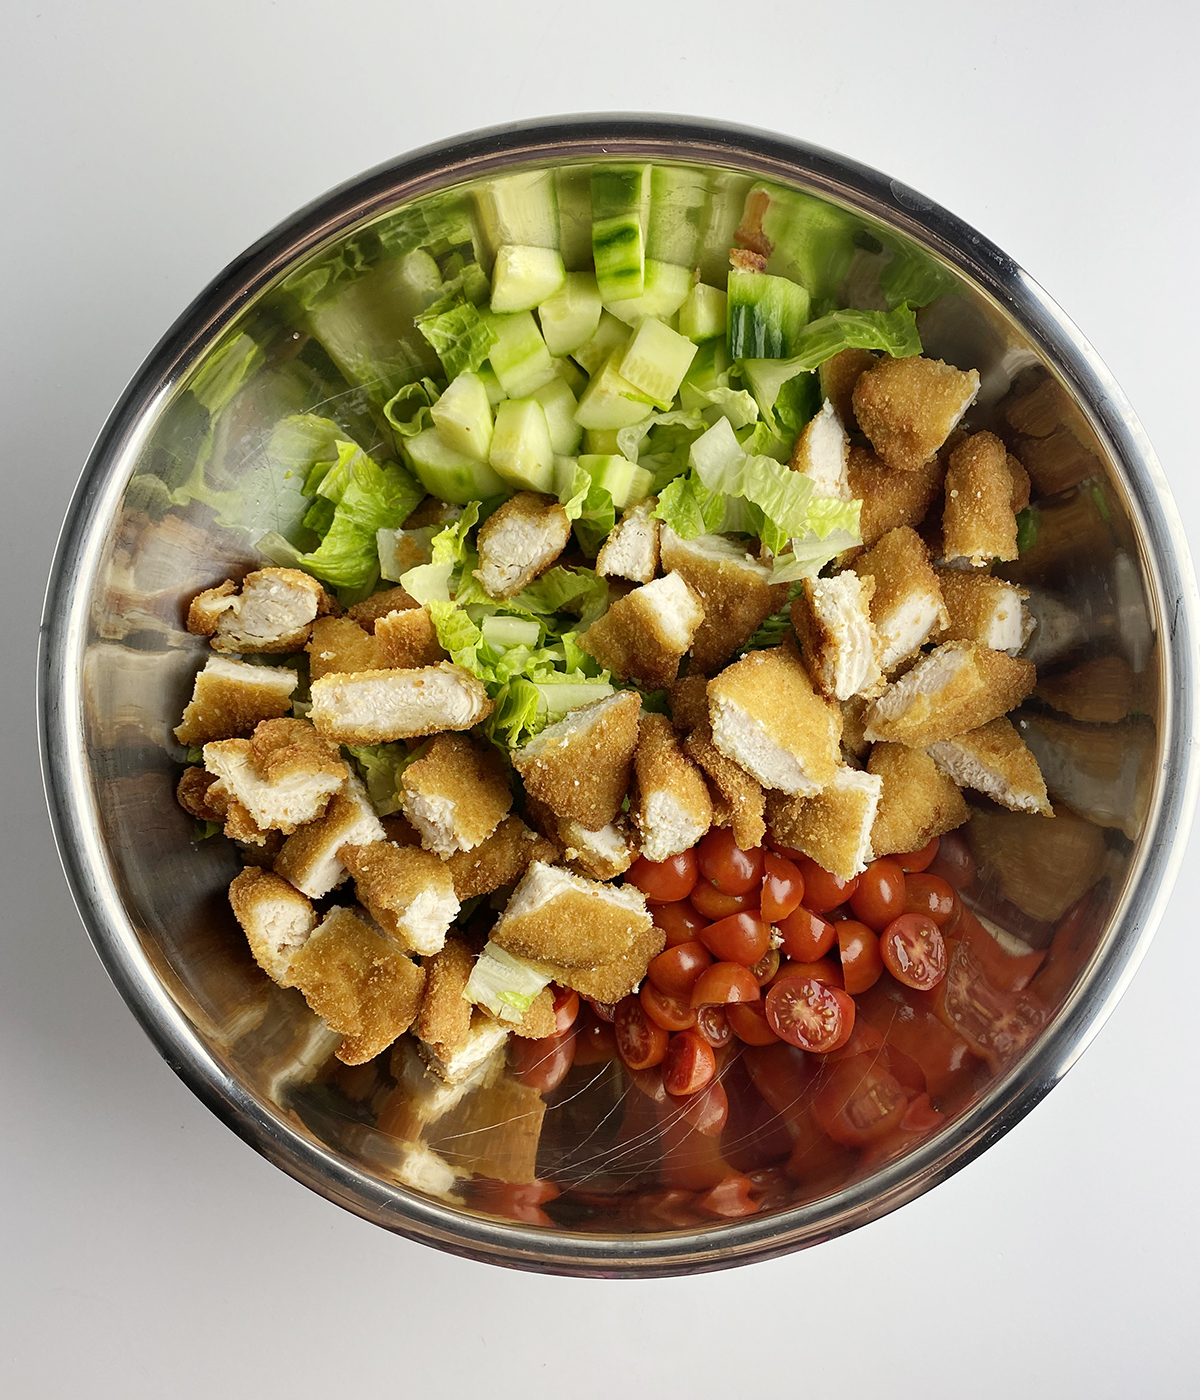 Fried chicken salad ingredients in a bowl.